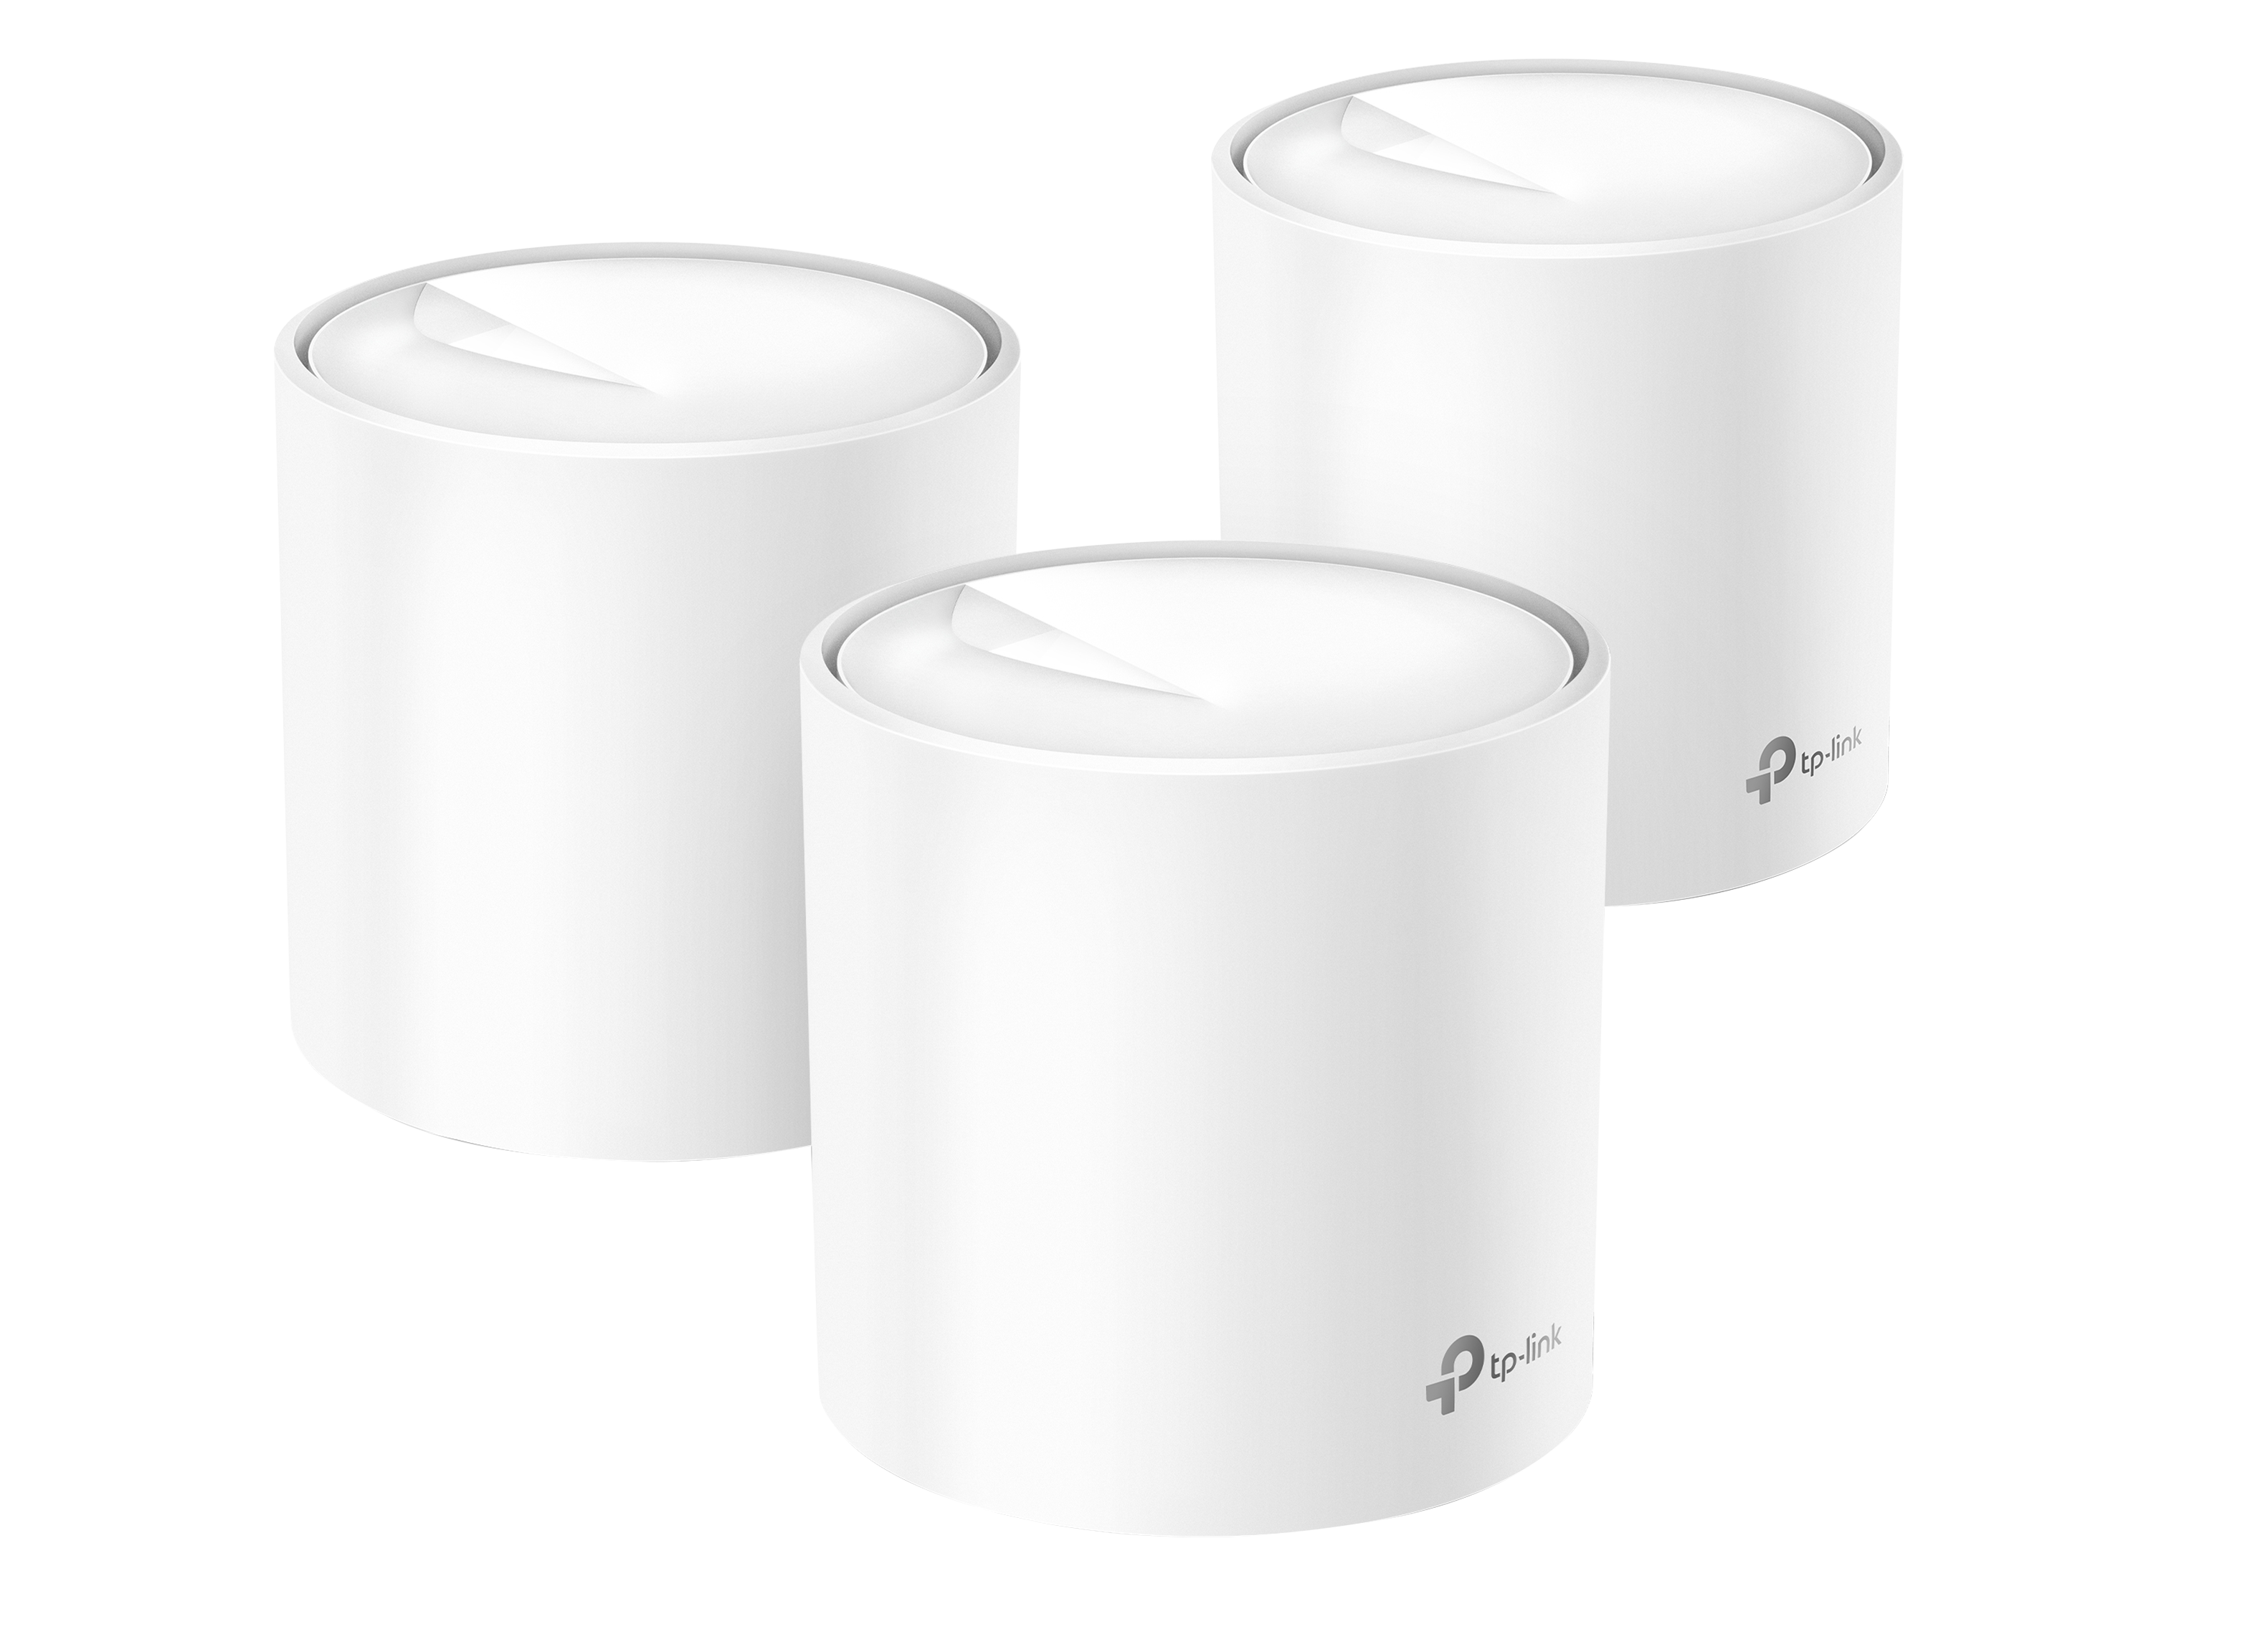 Shredded Slippery Premature TP-Link Deco X60 AX3000 (3-pack) Wireless Router Review - Consumer Reports